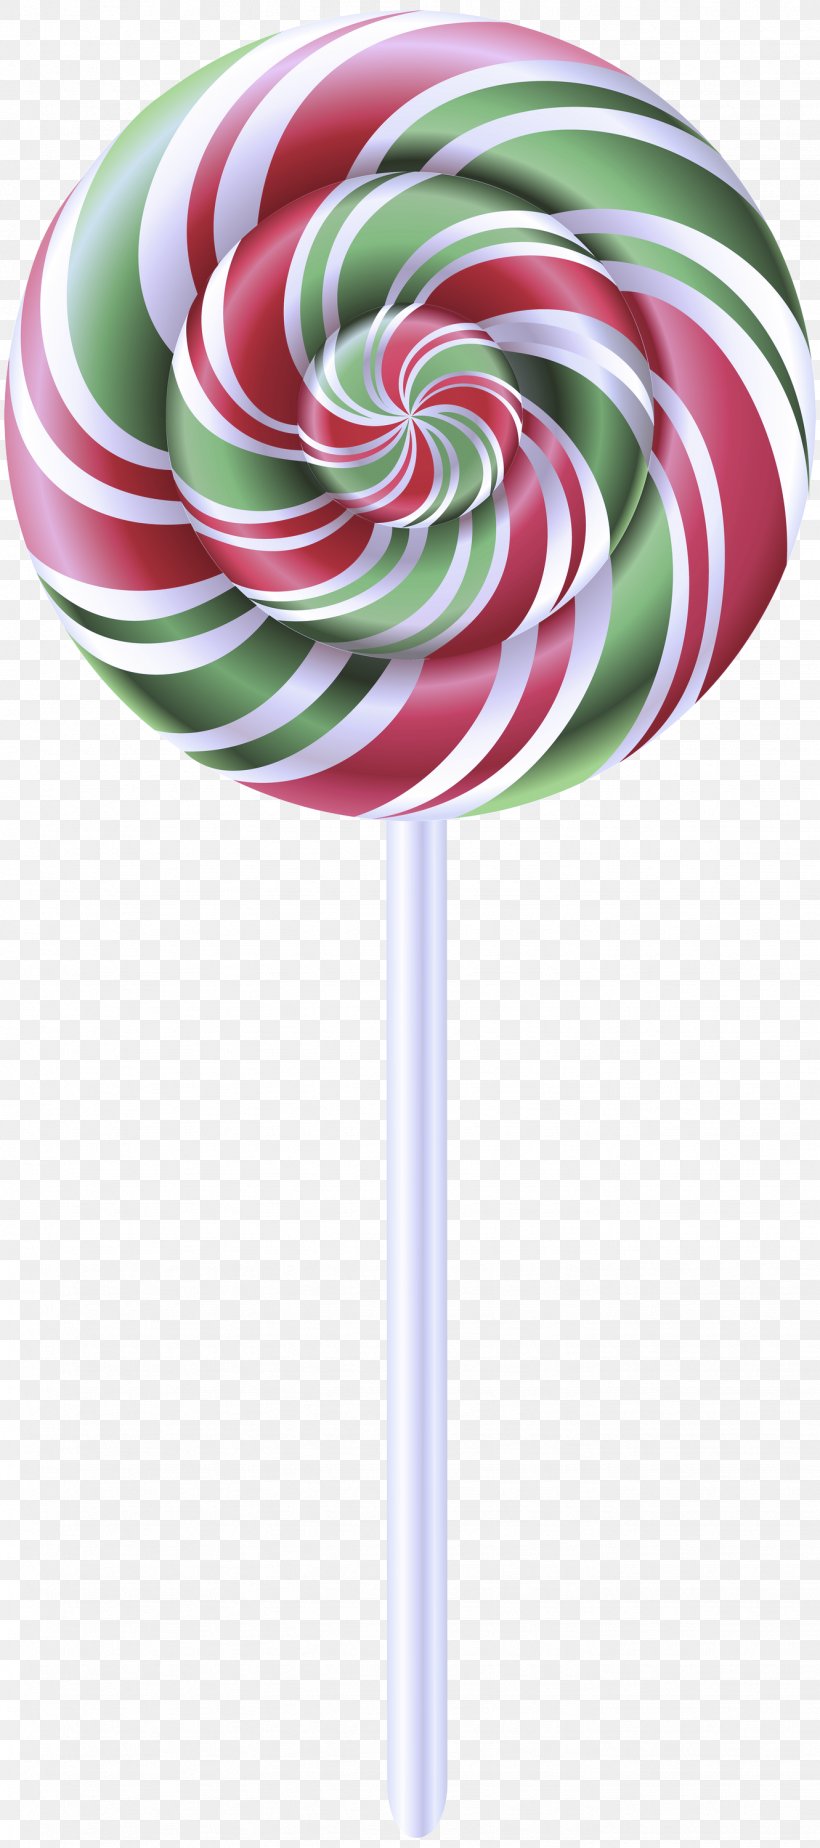 Lollipop Stick Candy Candy Confectionery Hard Candy, PNG, 1331x3000px, Lollipop, Candy, Confectionery, Food, Green Download Free